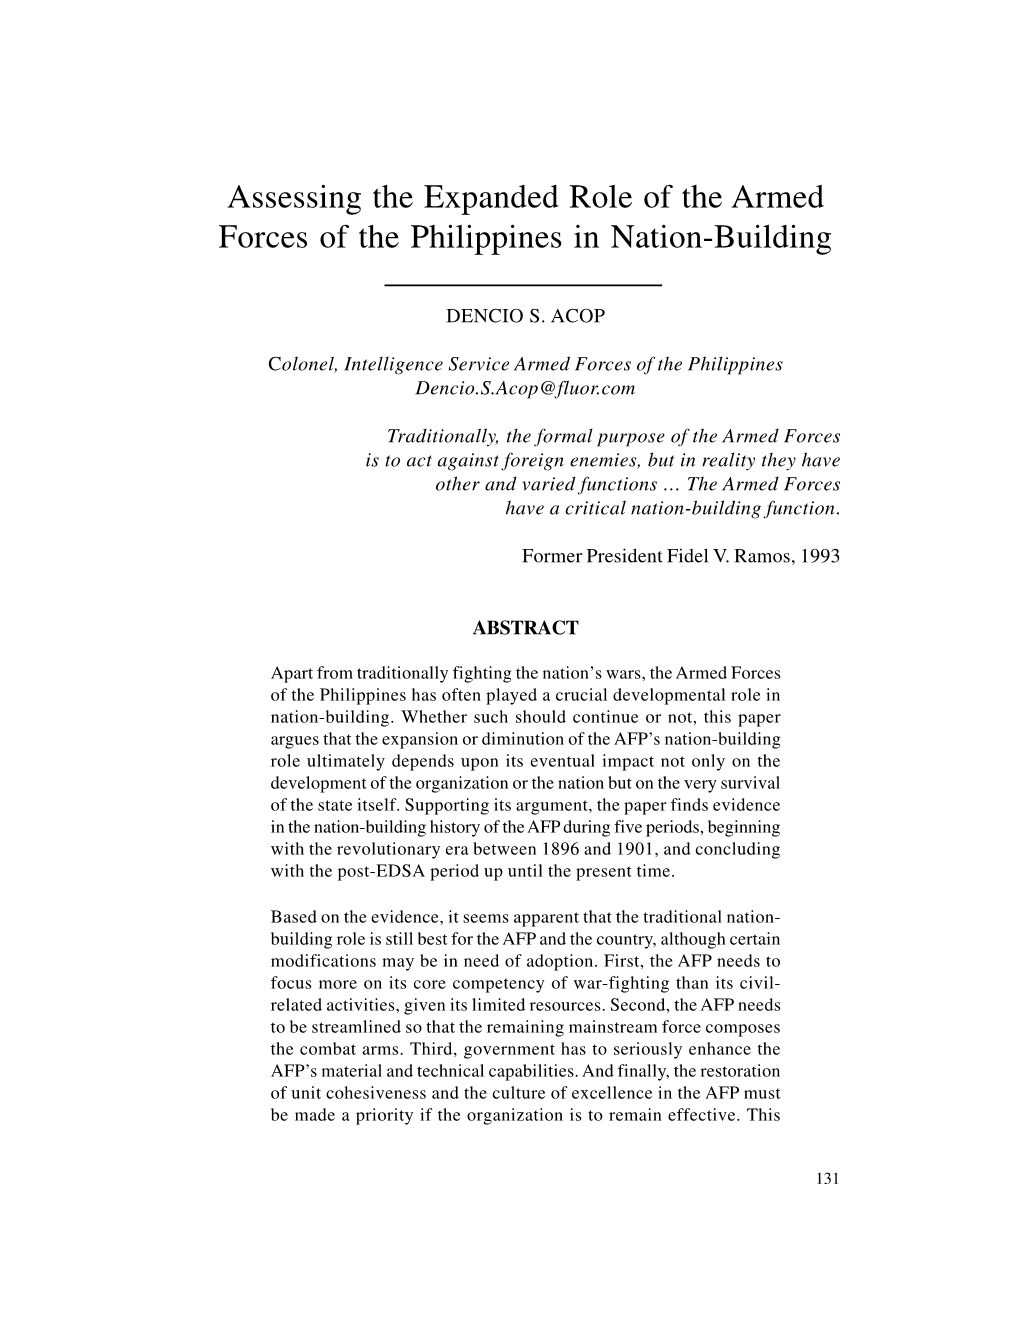 Assessing the Expanded Role of the Armed Forces of the Philippines in Nation-Building